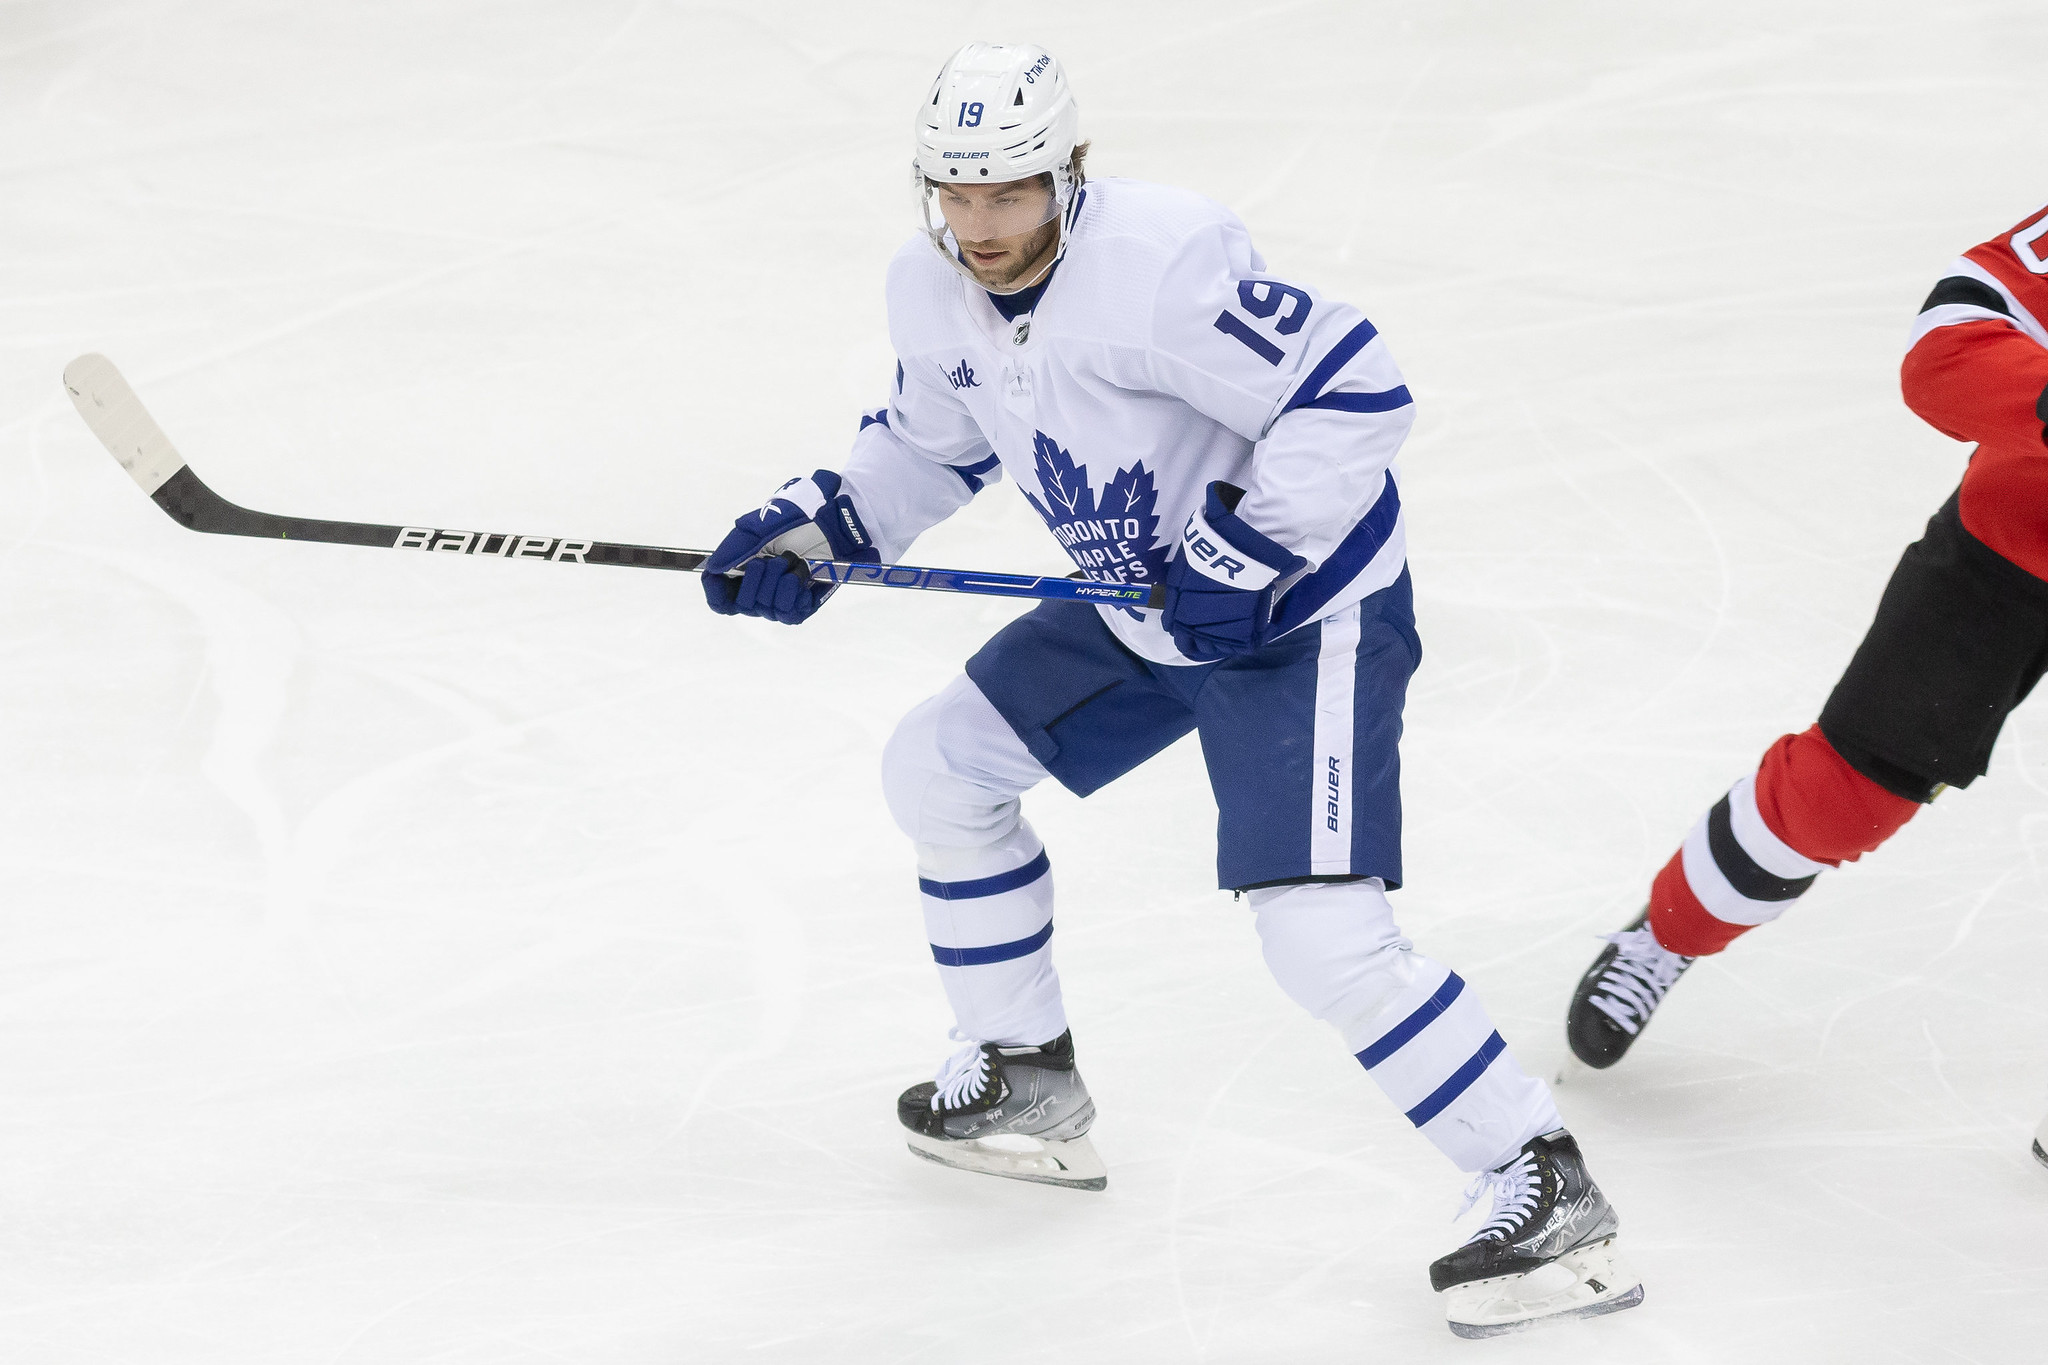 What Should Maple Leafs' Fans Expect from Nicolas Aube-Kubel? - BVM Sports